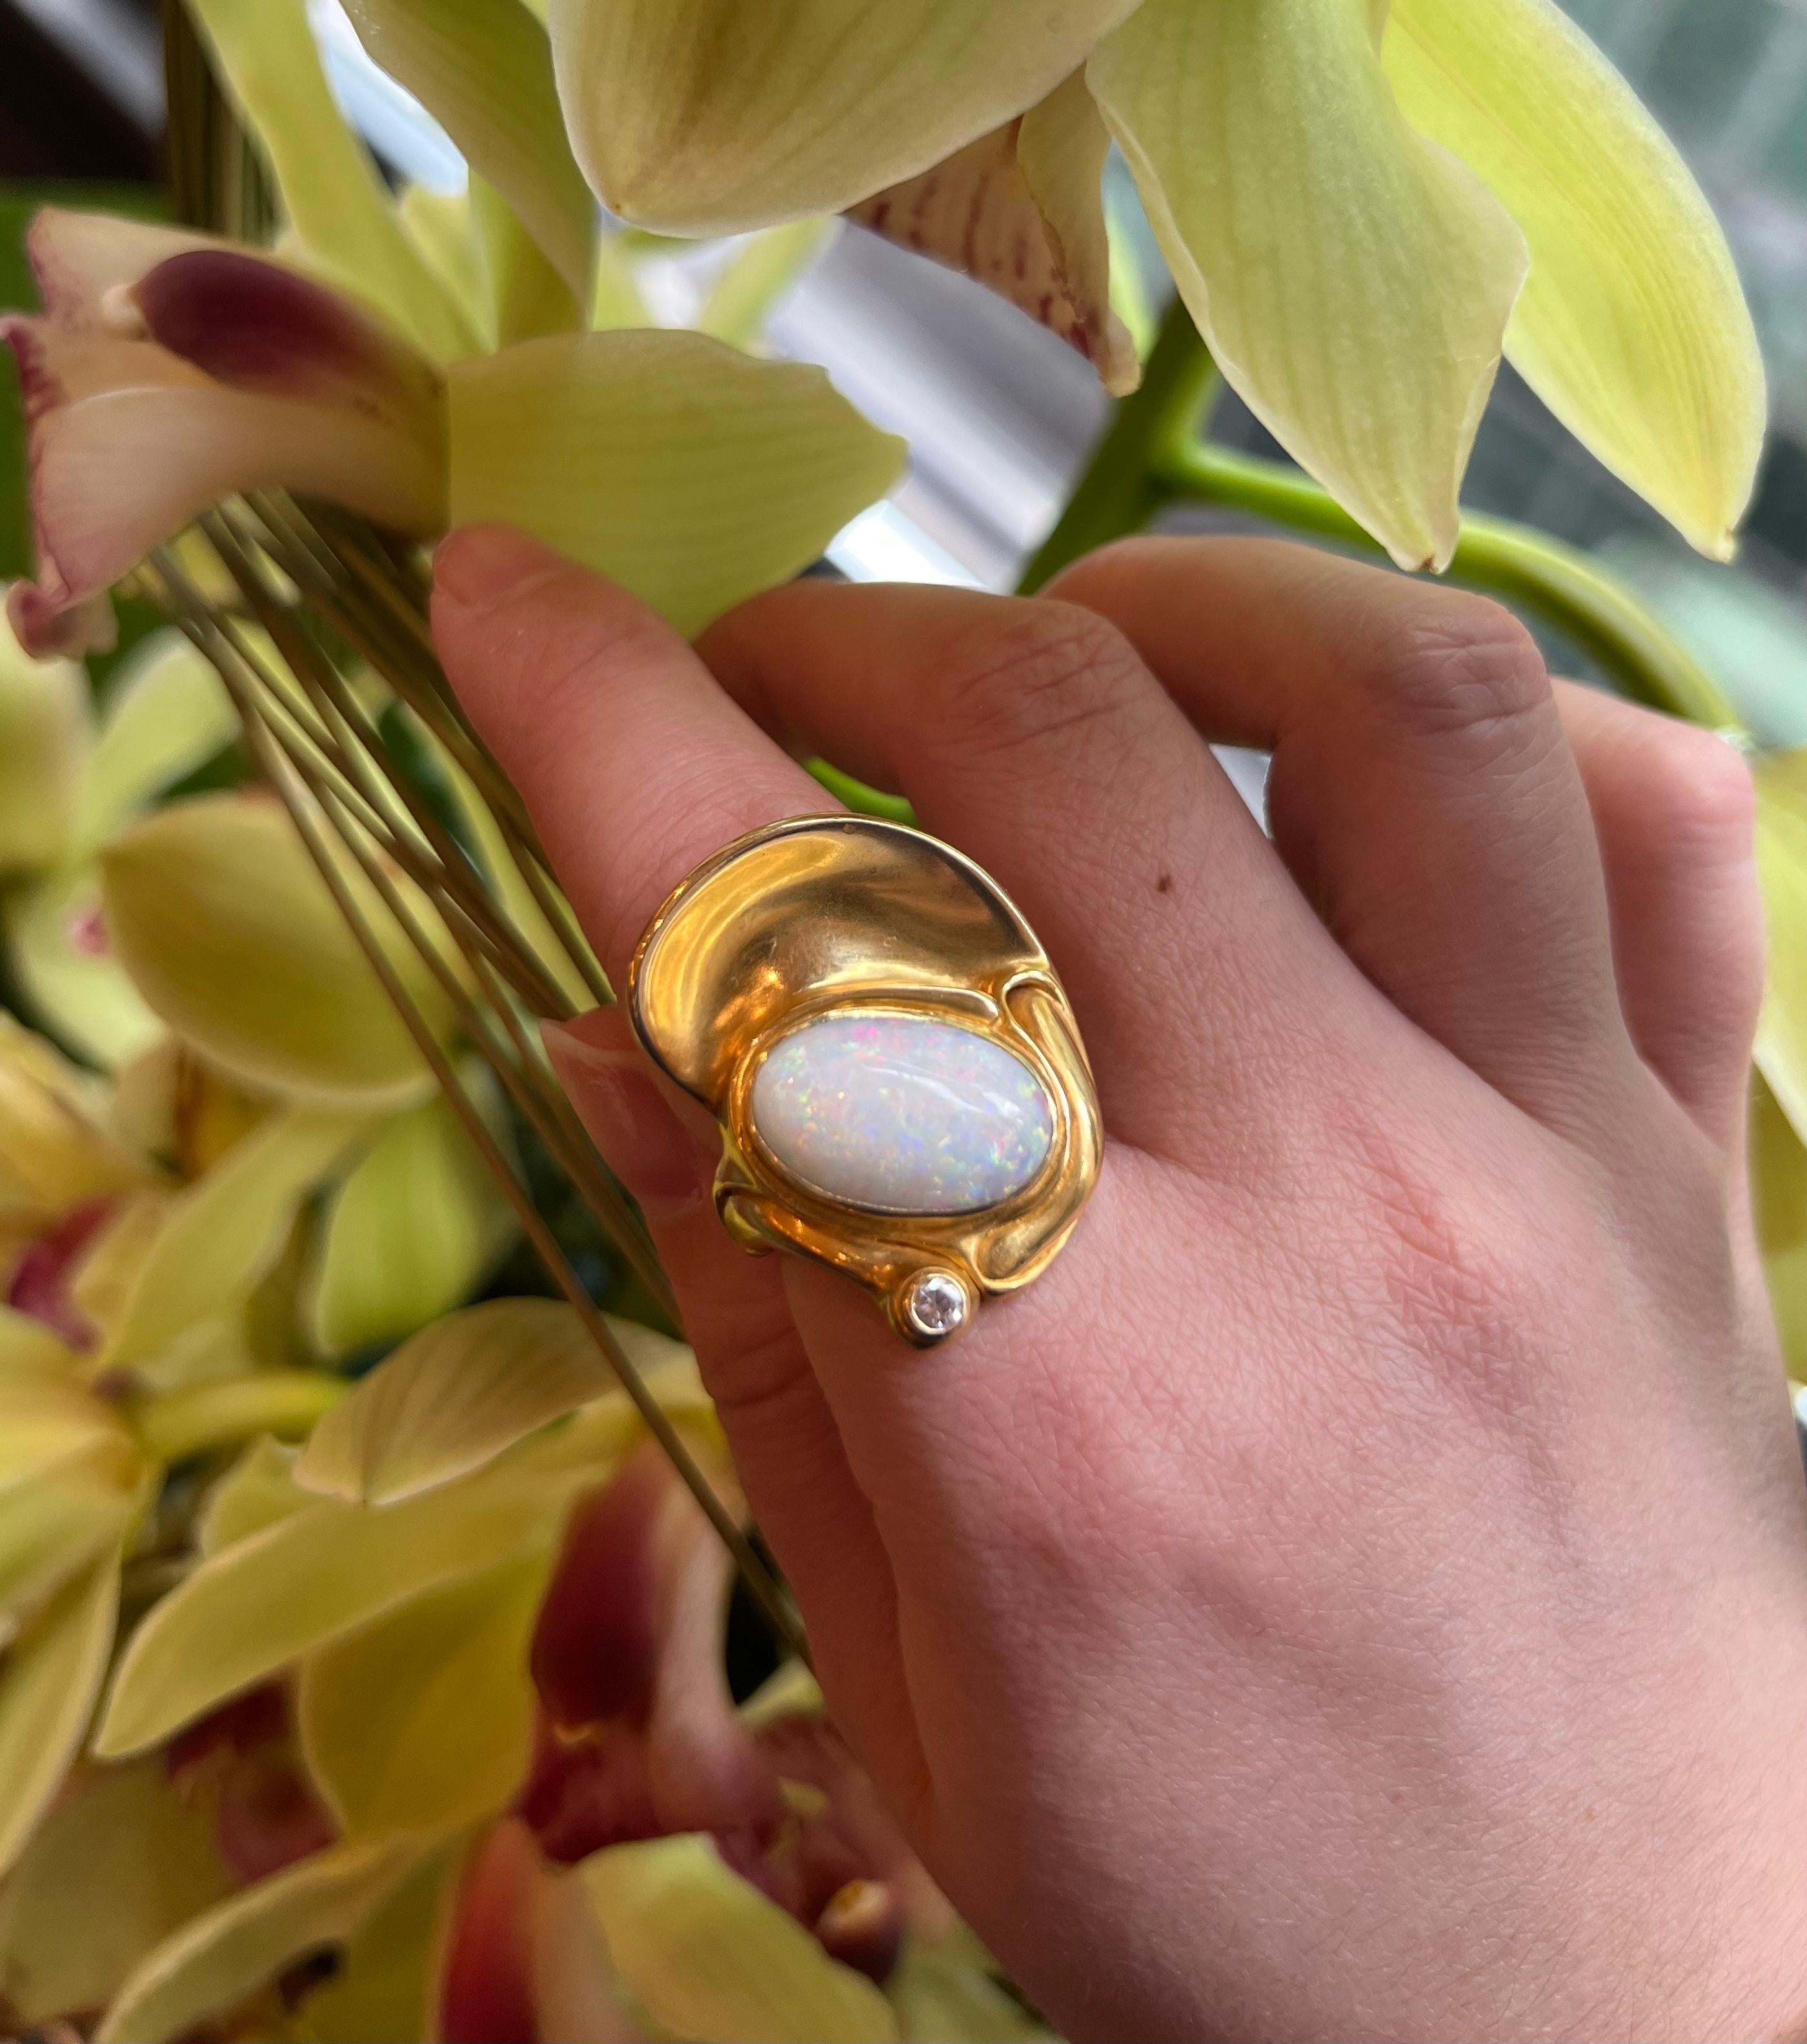 A unique white fire opal and diamond 18-karat yellow gold art jewel, this ring by Claude West, based at the famed Belgian jeweler Fernand Demaret, is Signed Demaret, 750, with the maker's mark. It is a ring size 7. This ring is not resizable.

In